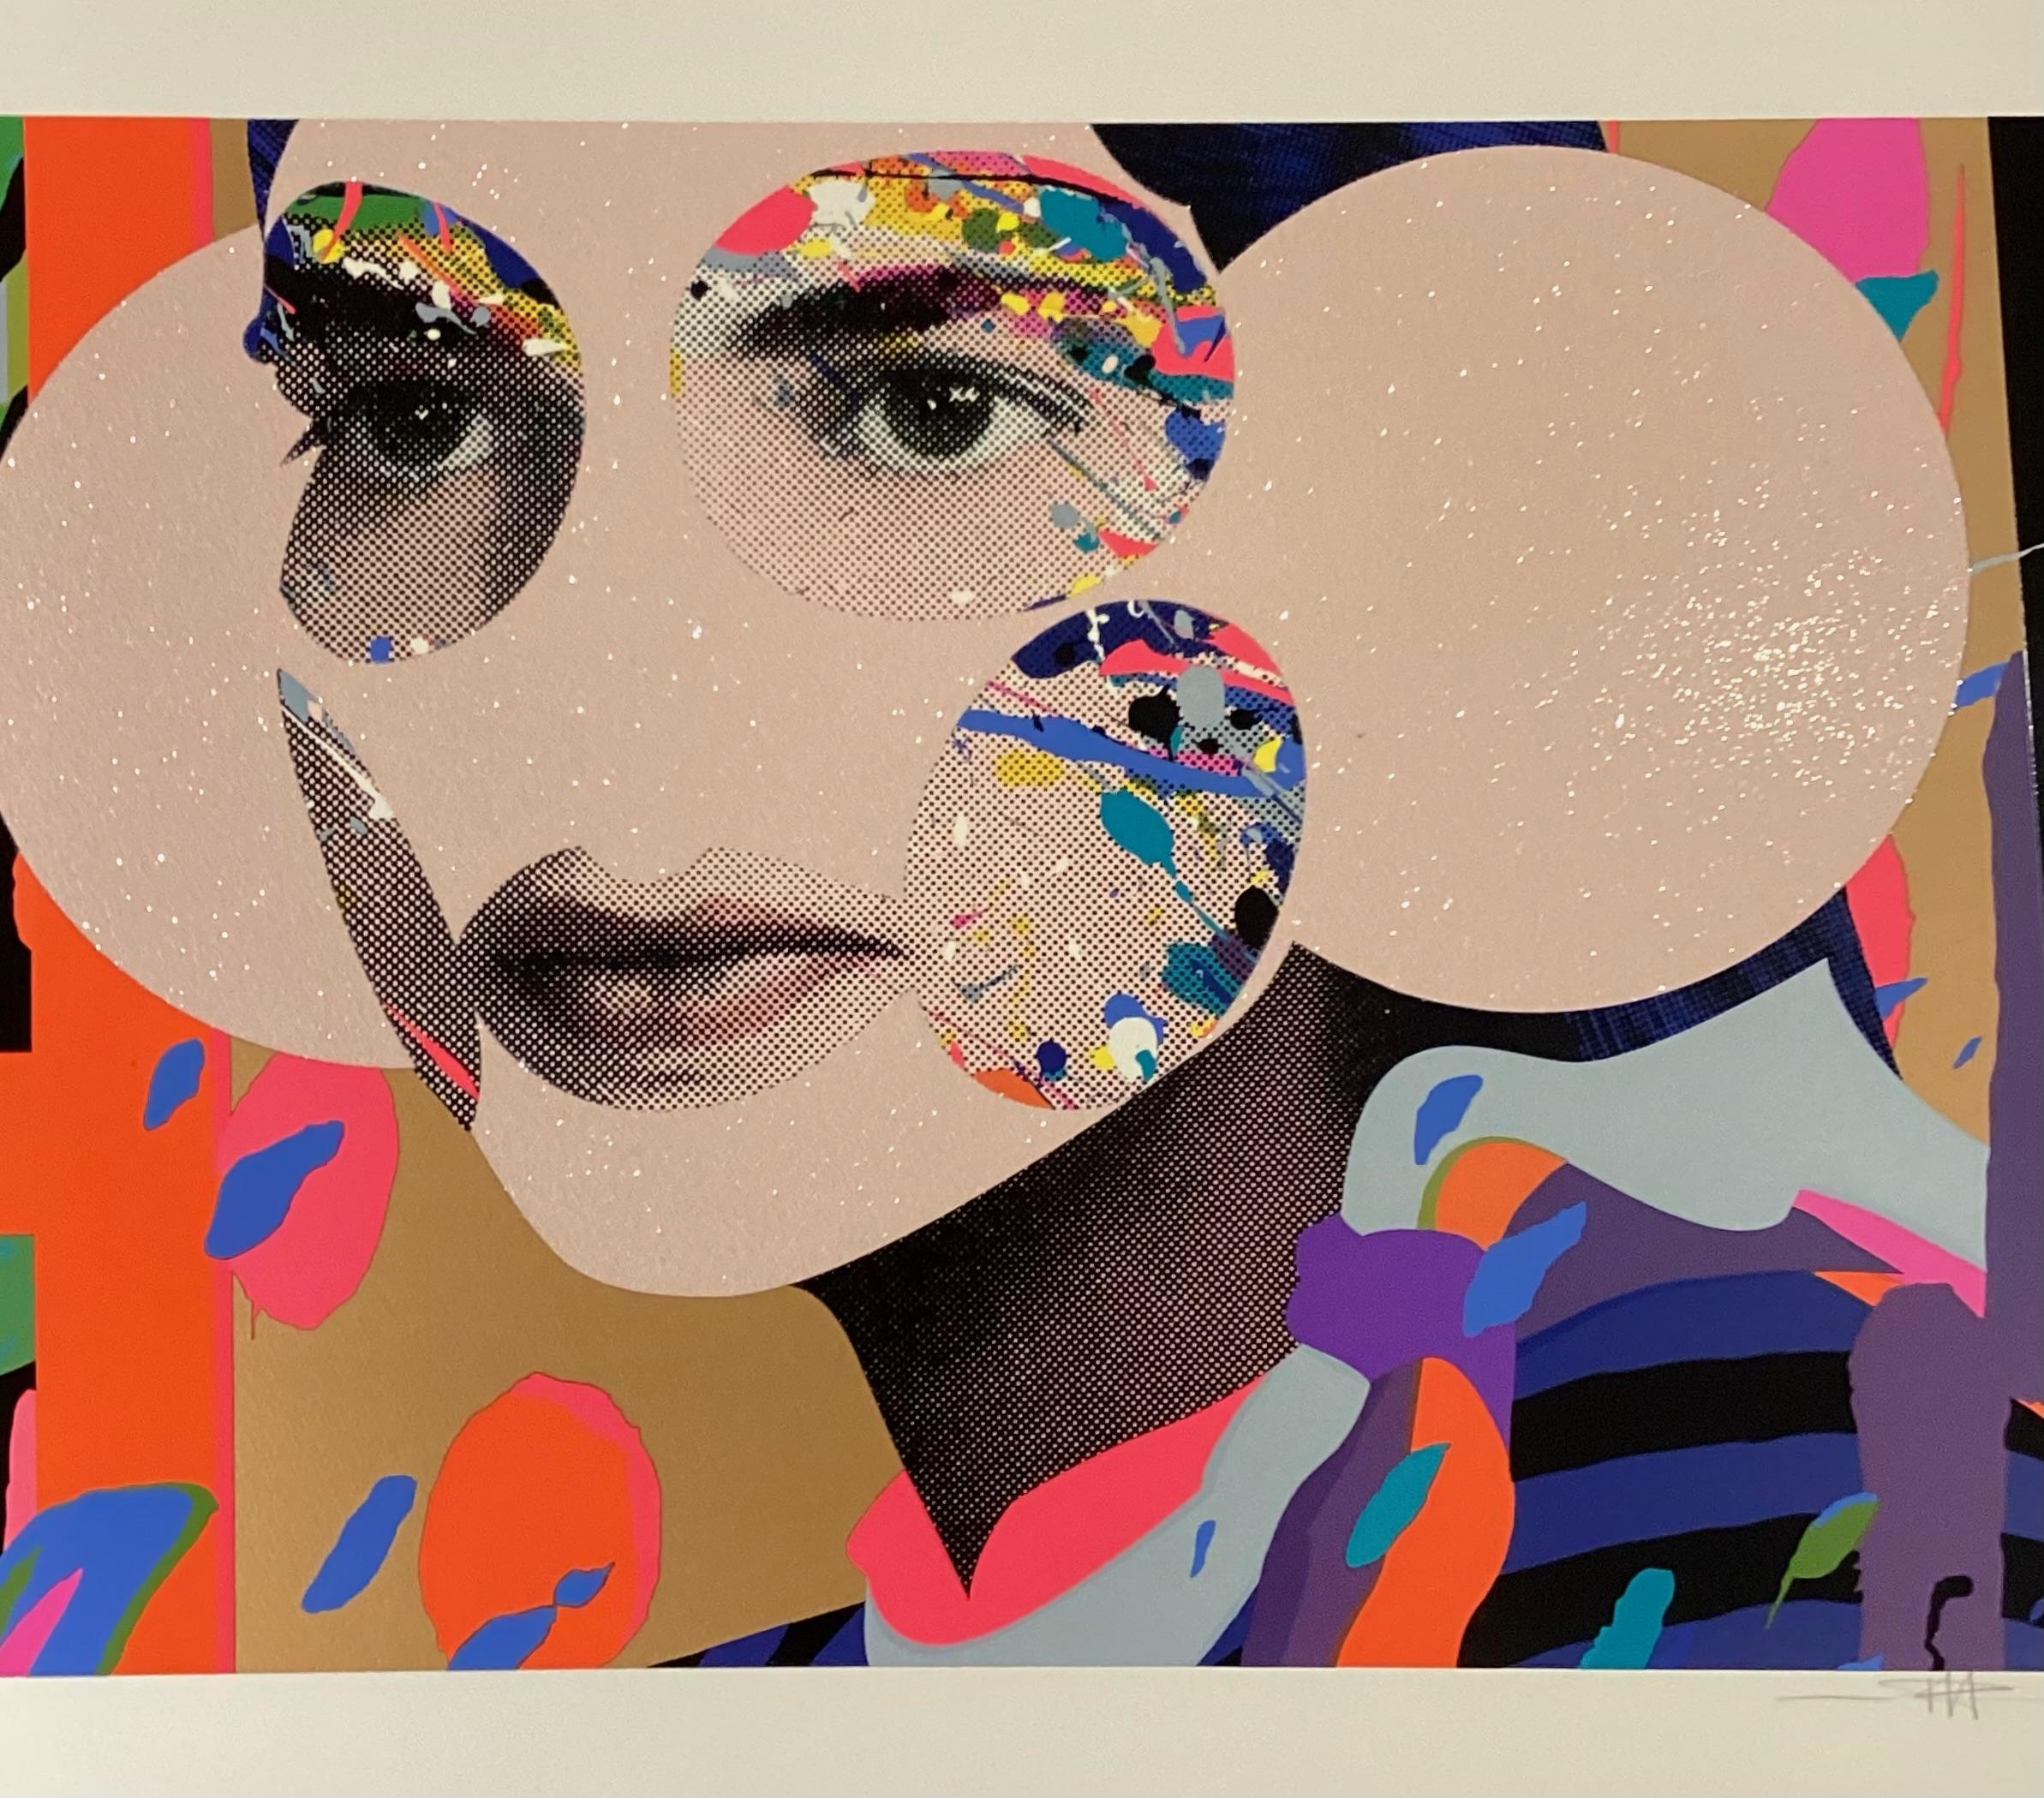 Paul Insect’s bright, multi-textured collages feature cropped portraits, patterned color fields, benday dots, and decorative elements such as diamond dust and glitter. The U.K.-born and -based artist, who prefers to keep his true identity anonymous,